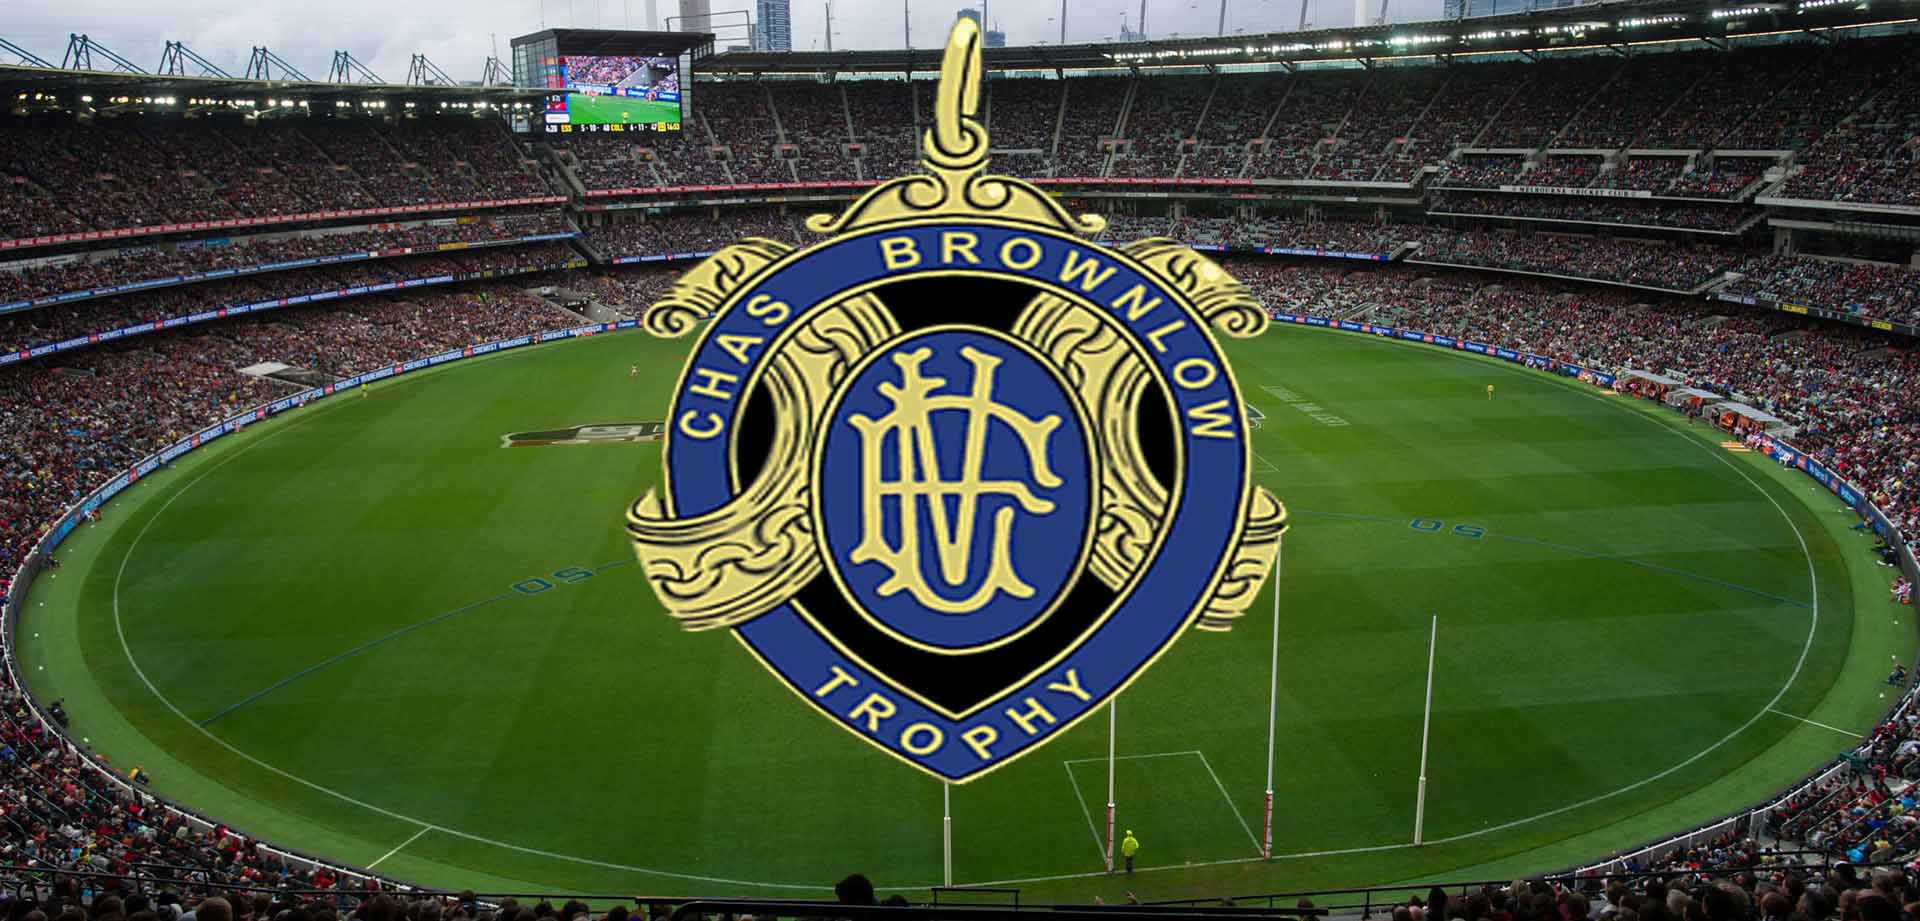 Brownlow Medal 2022: How to Watch Brownlow Online, TV Channel, Date, Time